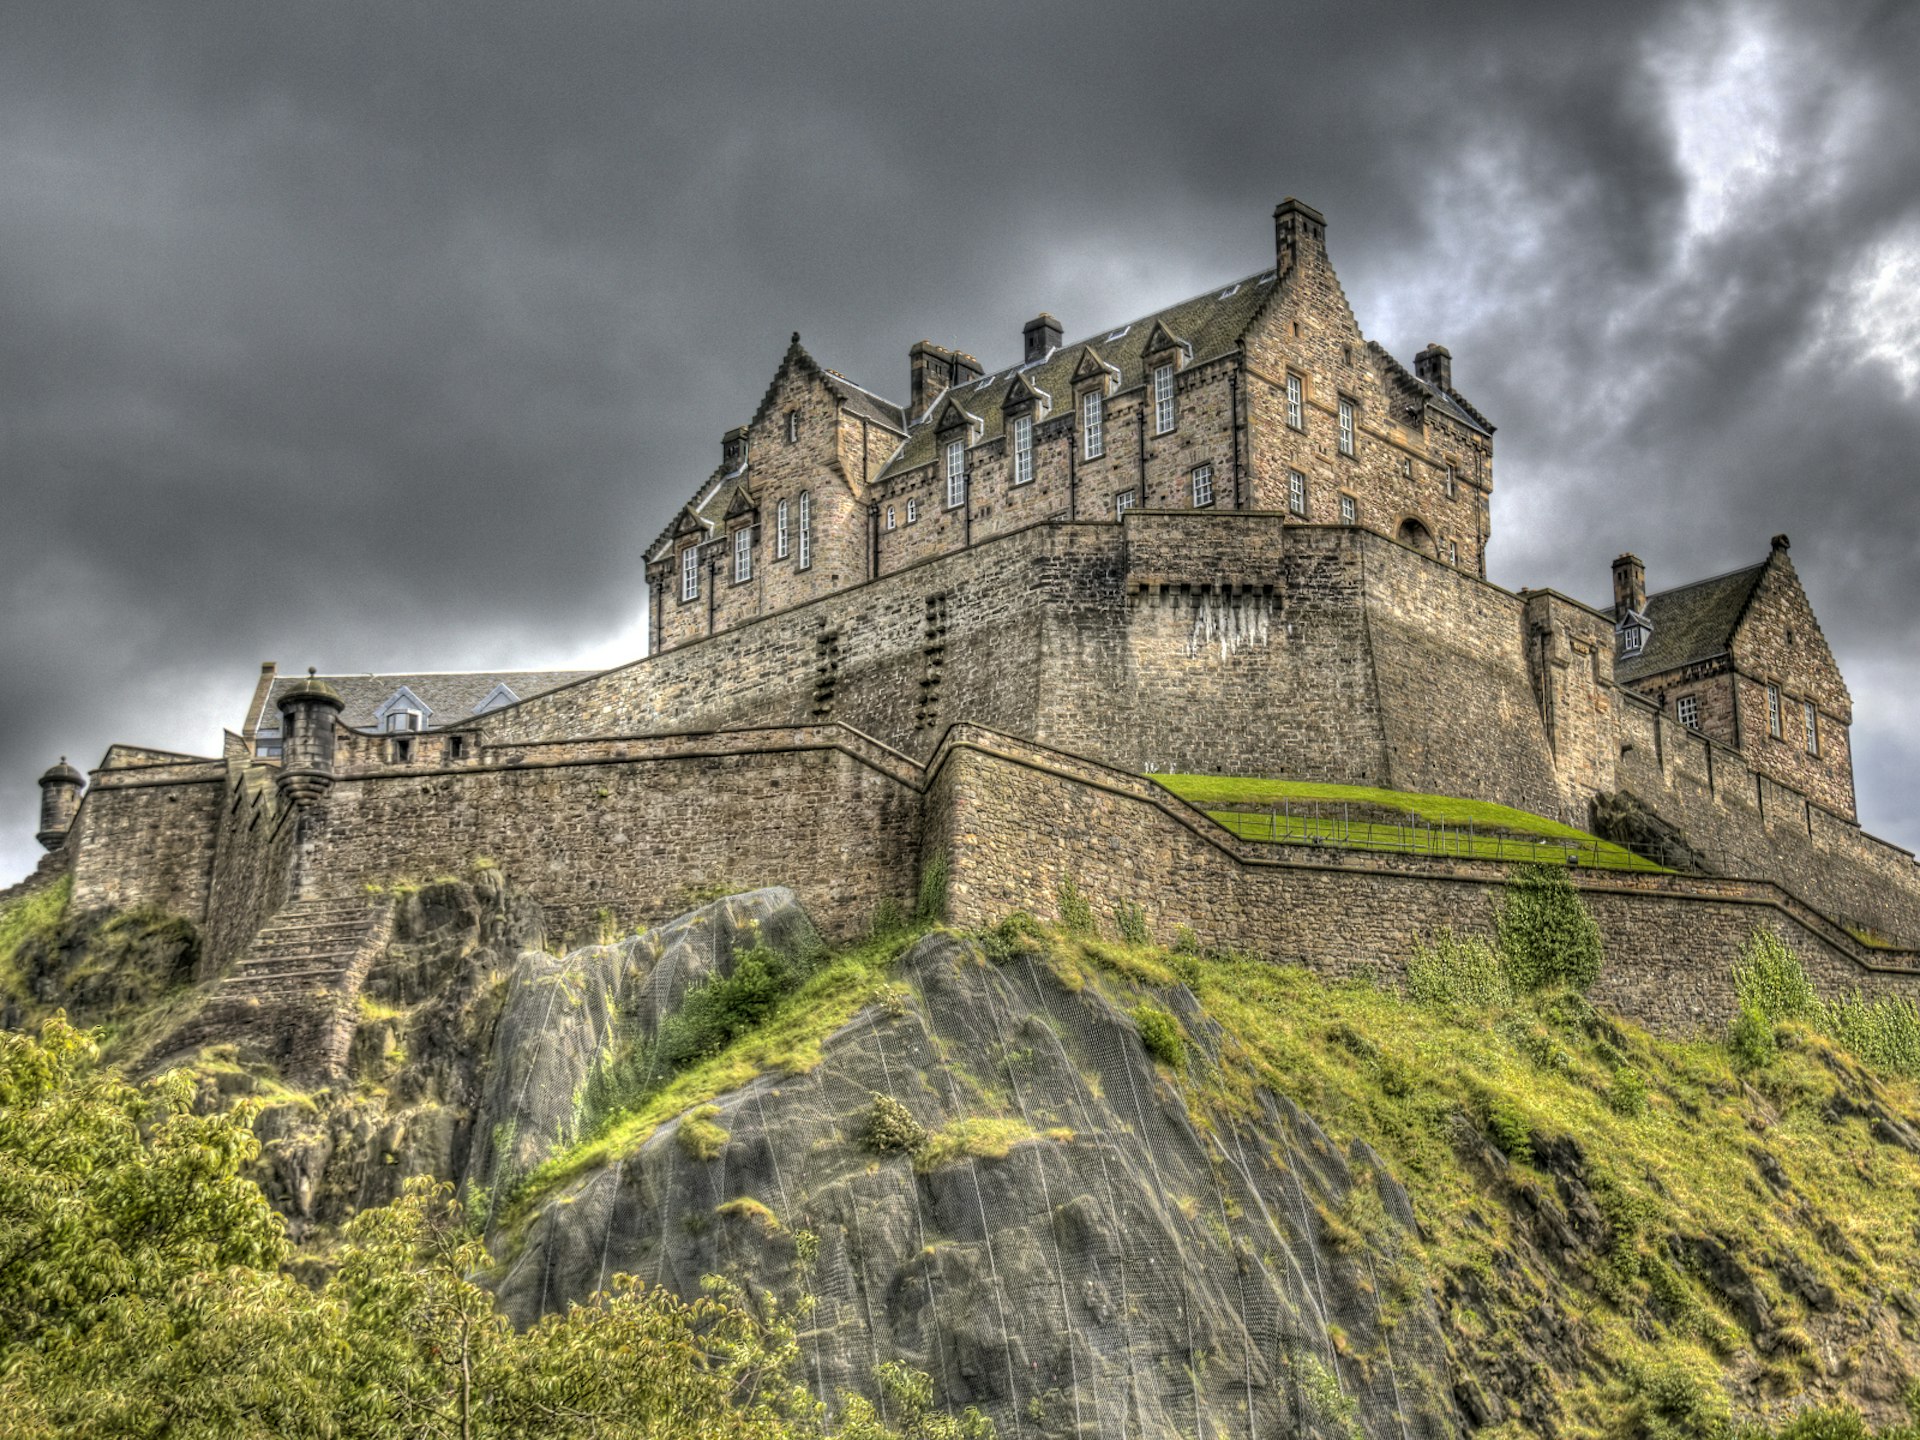 Looking up to Edinburgh Castle with stormy skies in the background